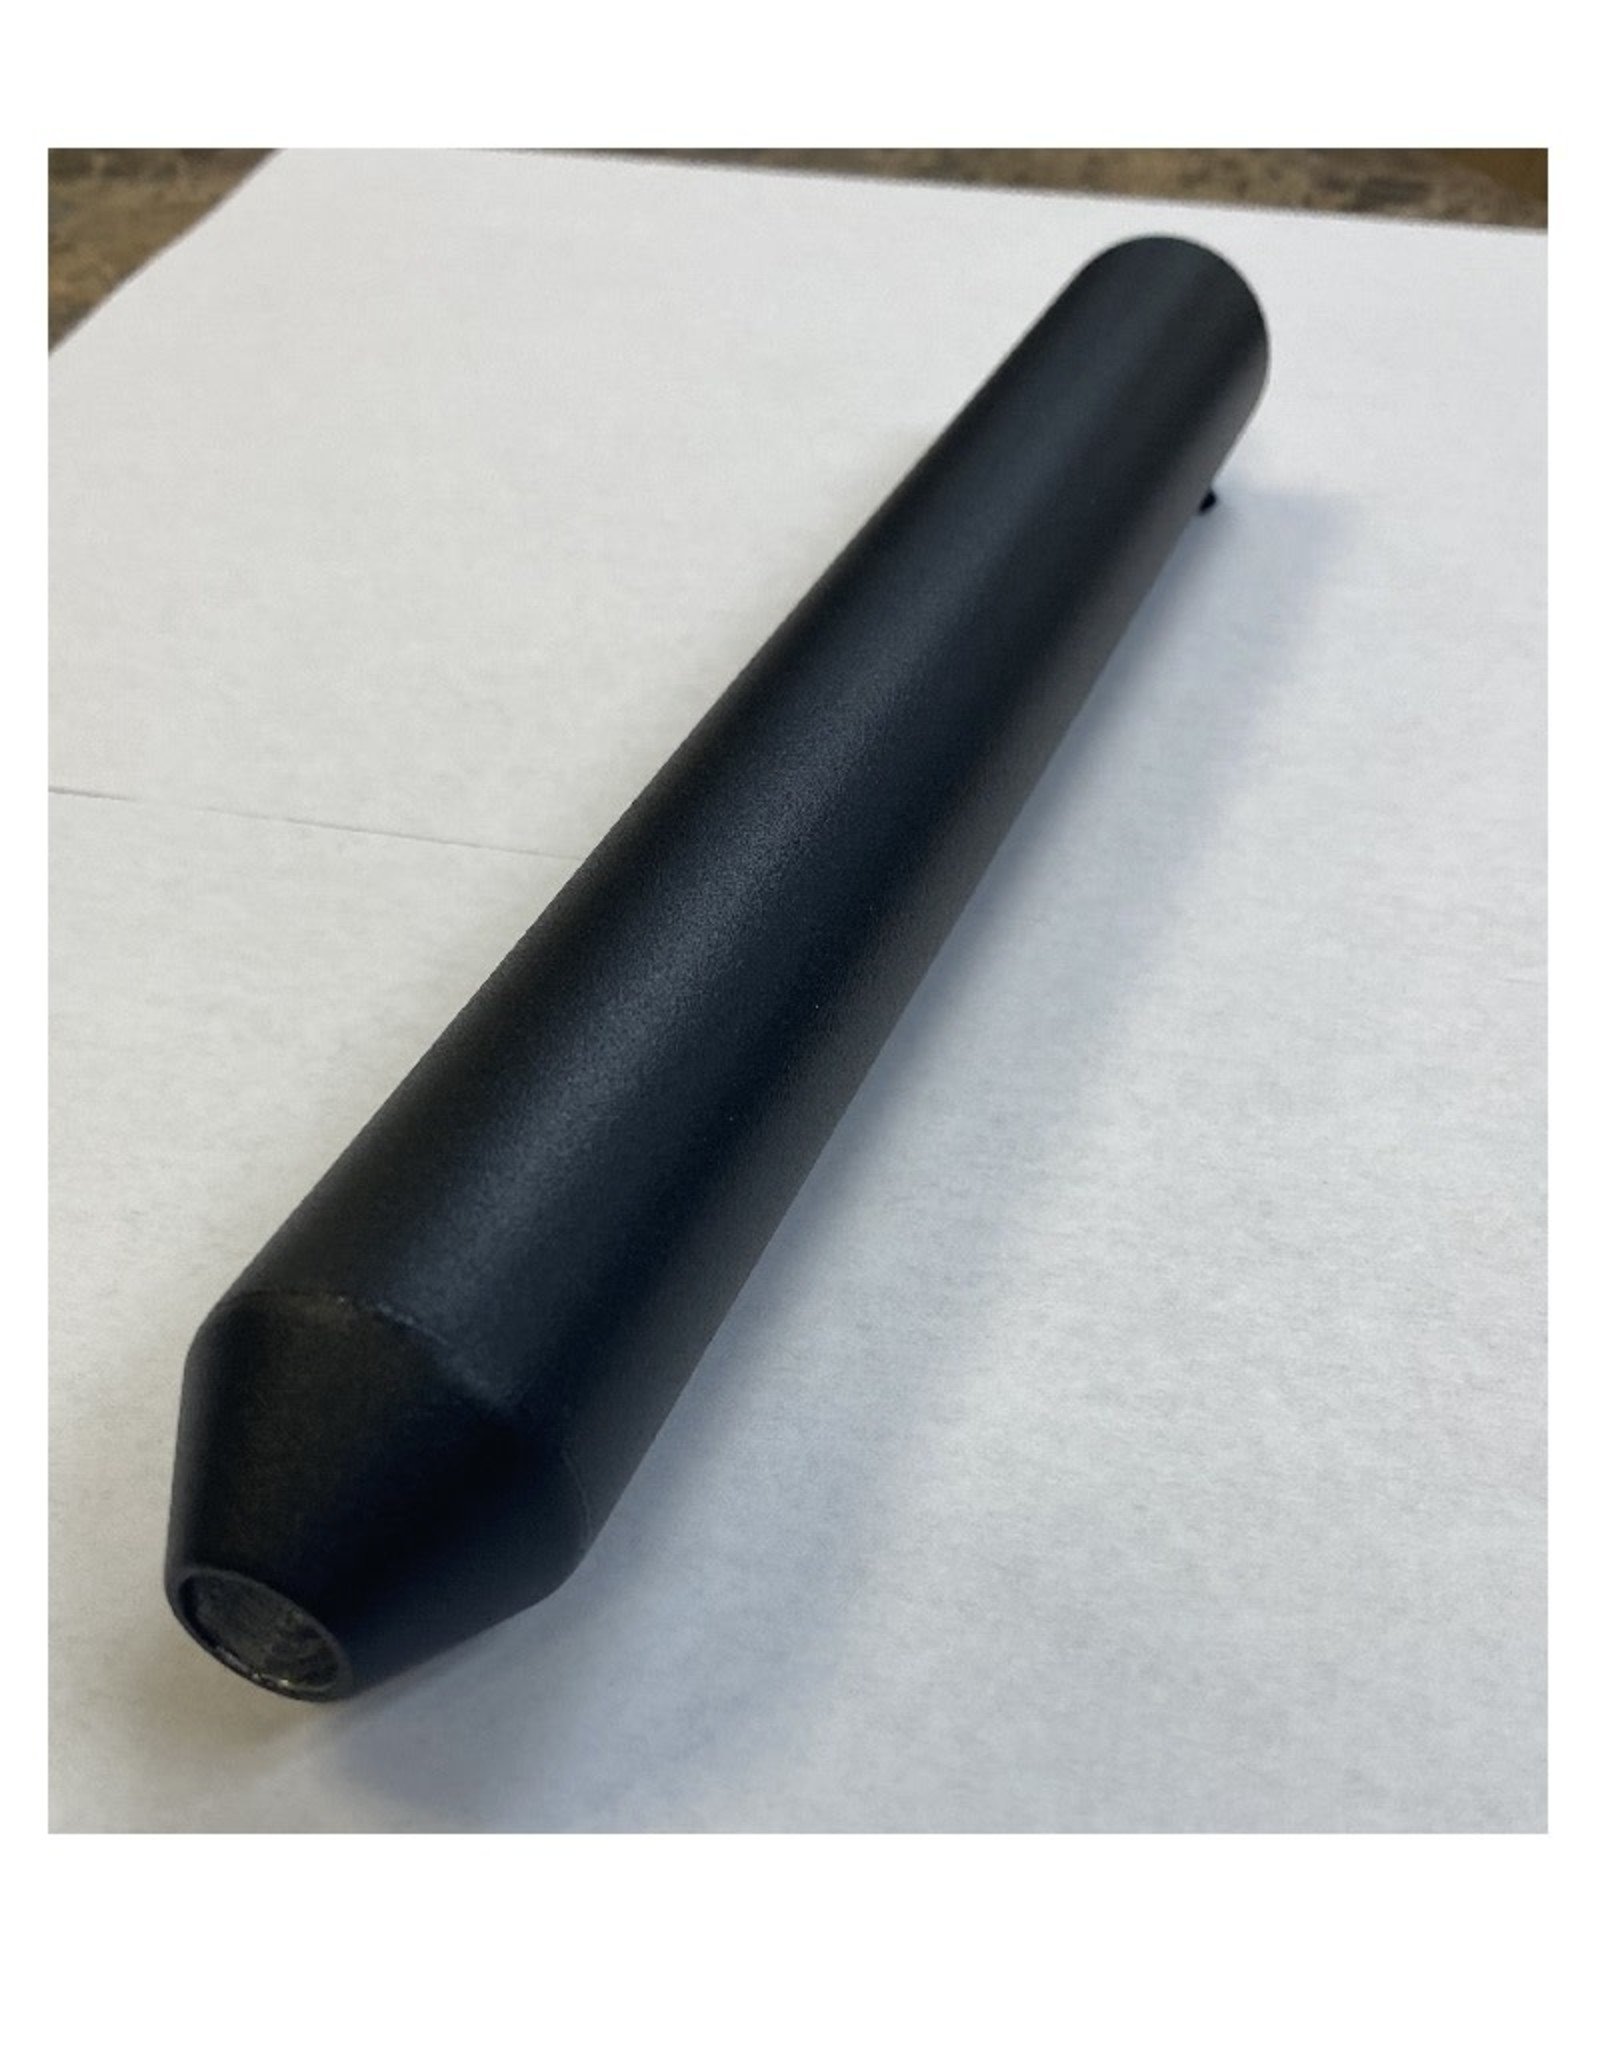 Aerotech - Wolf Airguns One Piece Silencer for Crosman 2240 and 2250